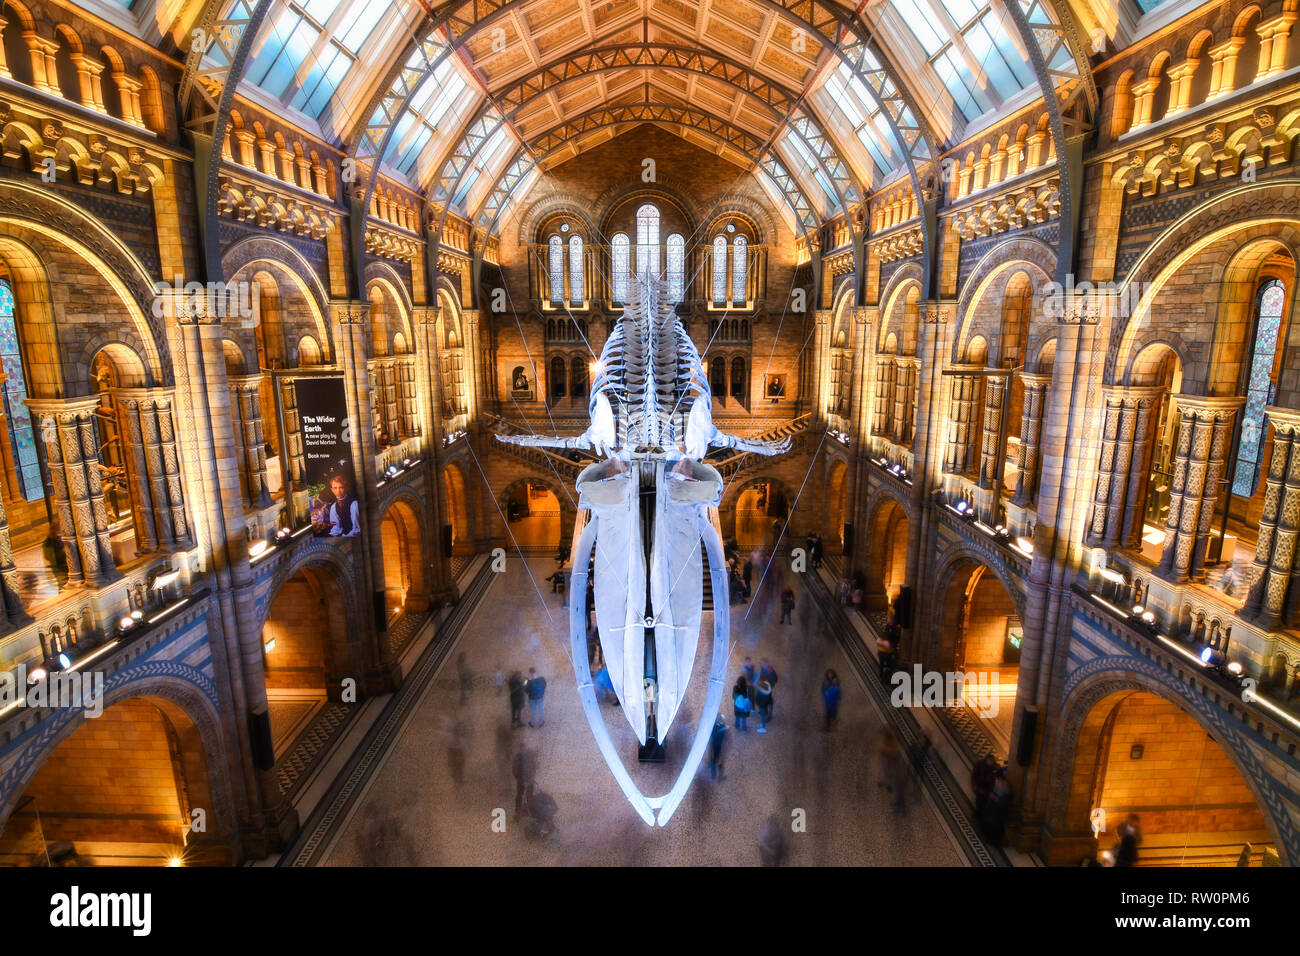 London Natural History Museum Interior Architecture Blue Whale 2018 11 17 Stock Photo